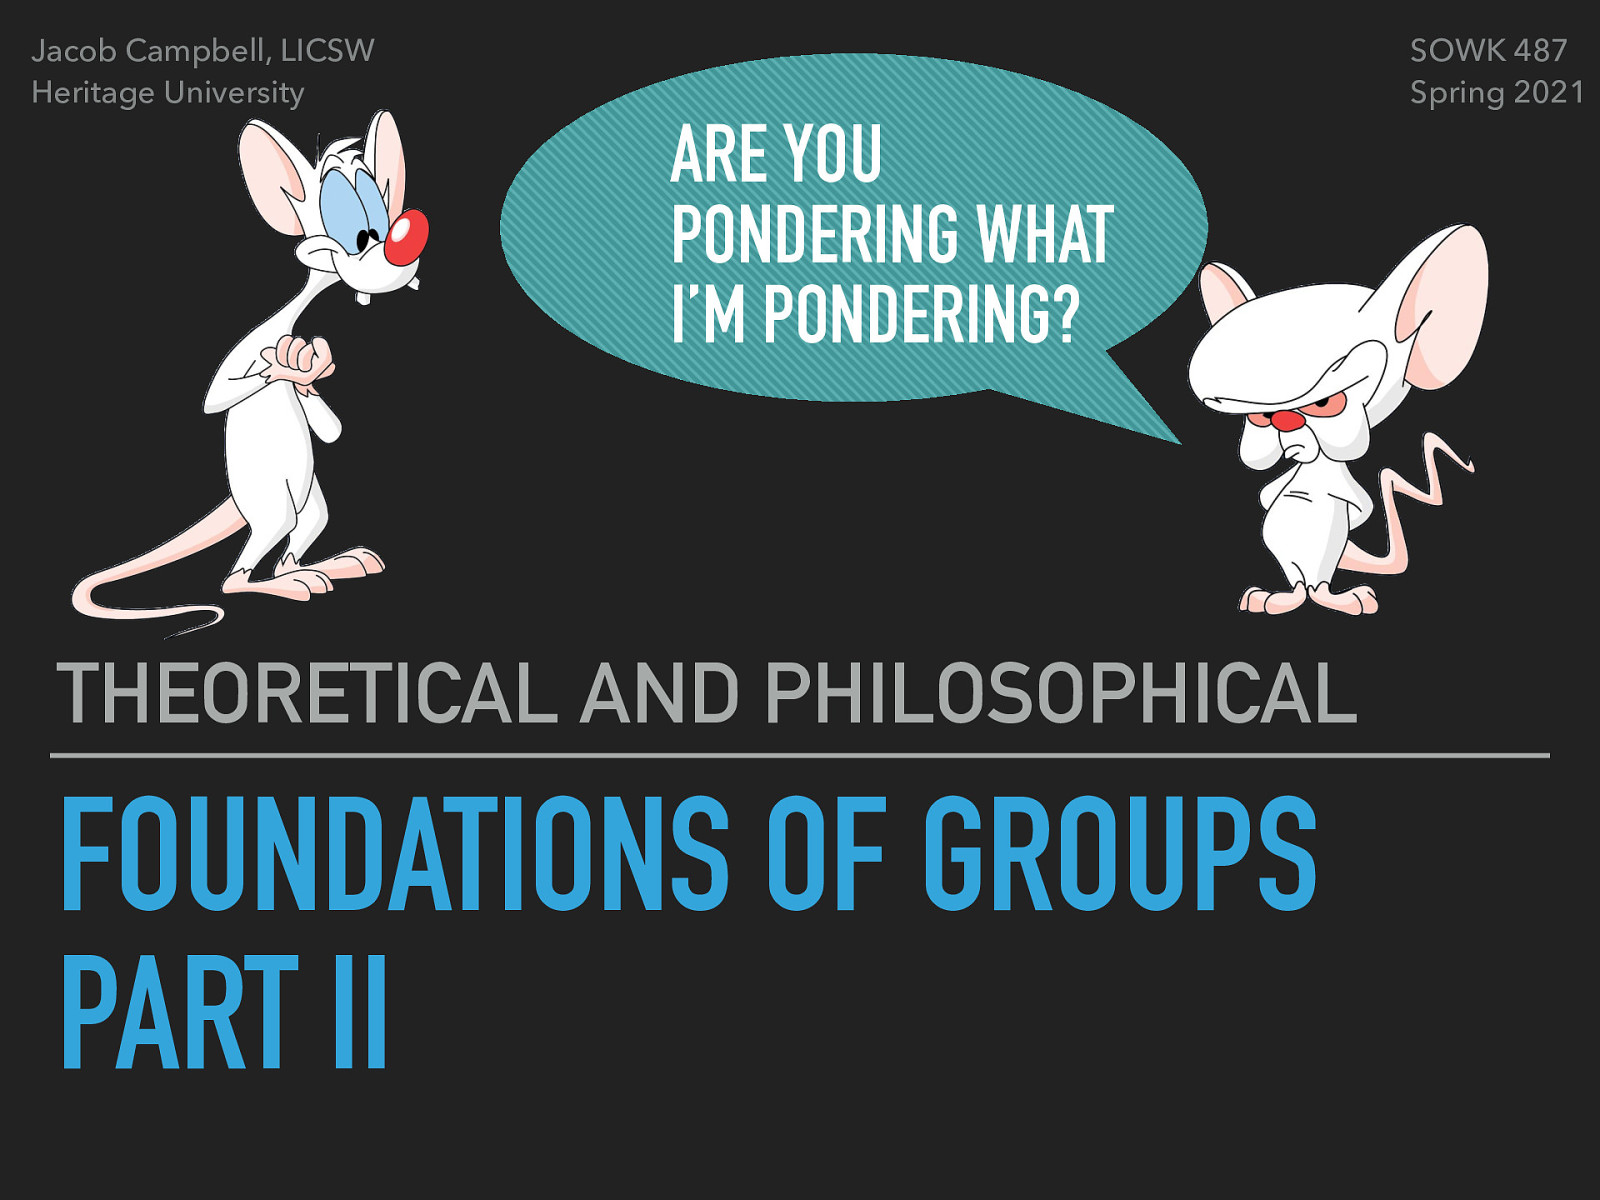 SOWK 487 Week 03 - Foundations for Groups Part II